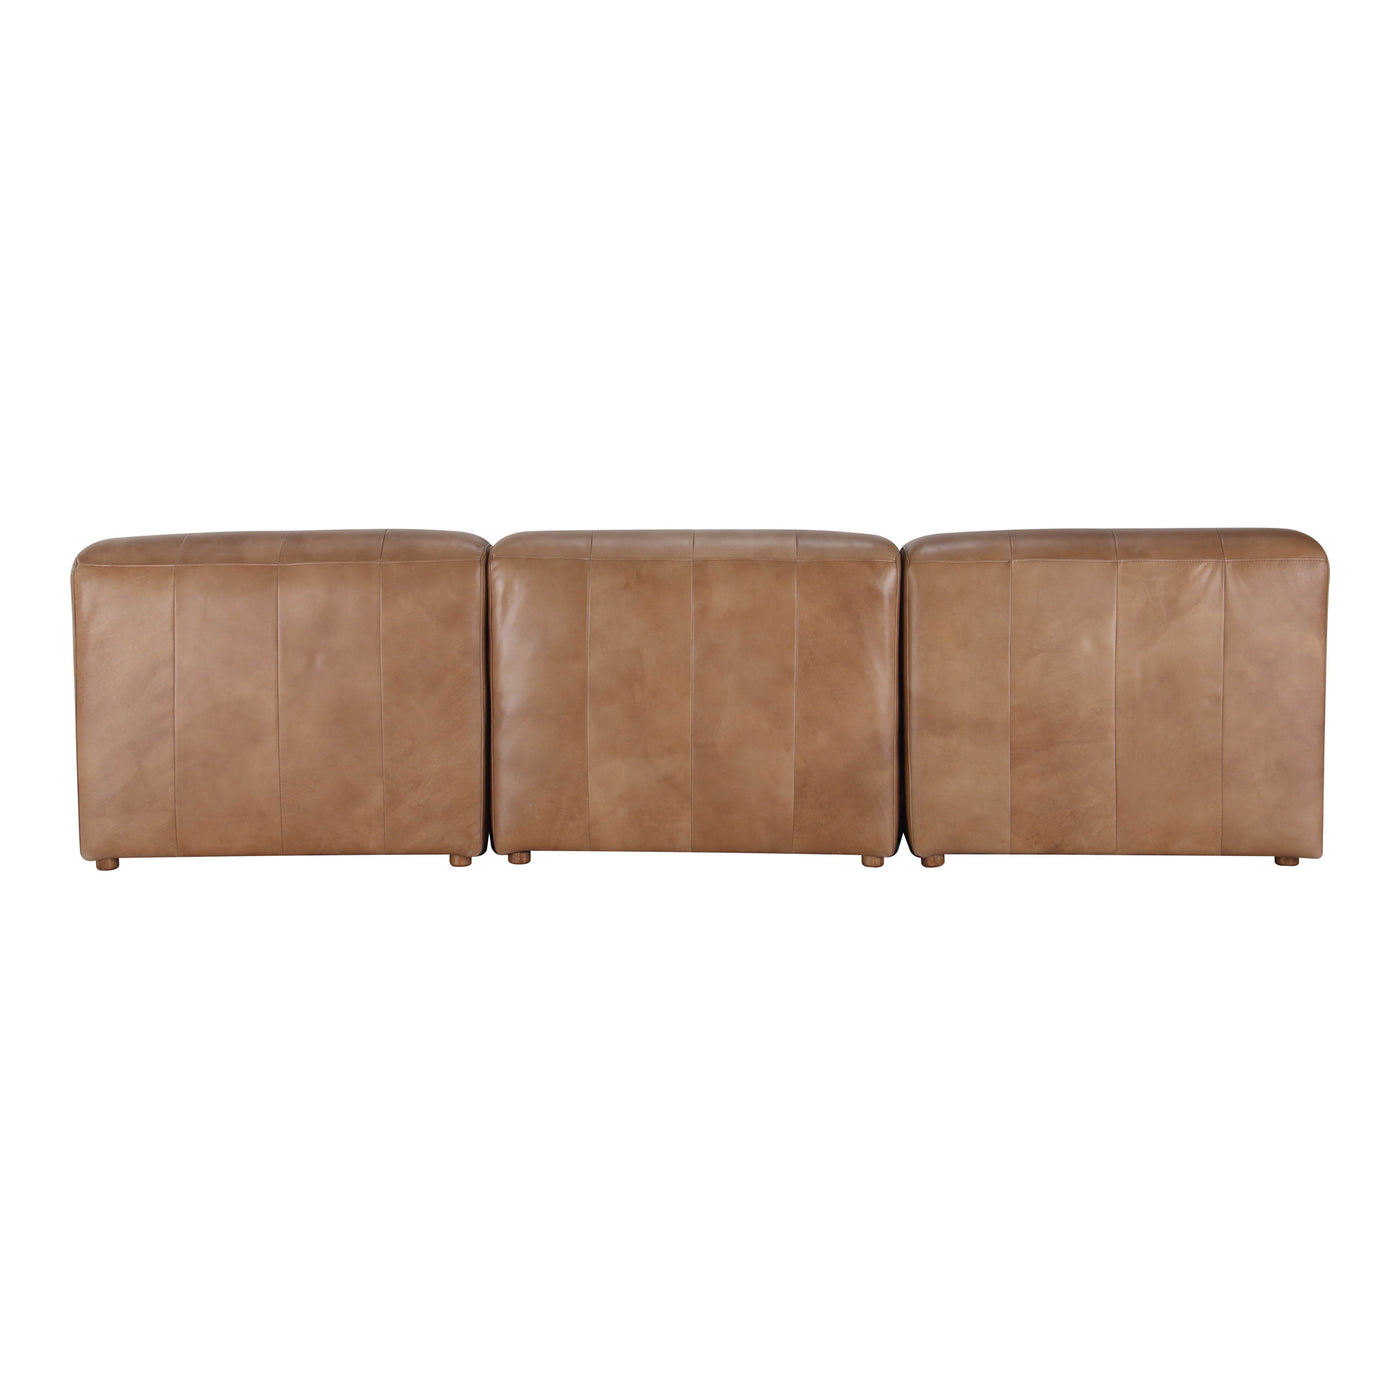 Outfit your space with comfort and quality, which you are sure to find in the Ramsay Modular Sectional. Ribbed top-grain l...